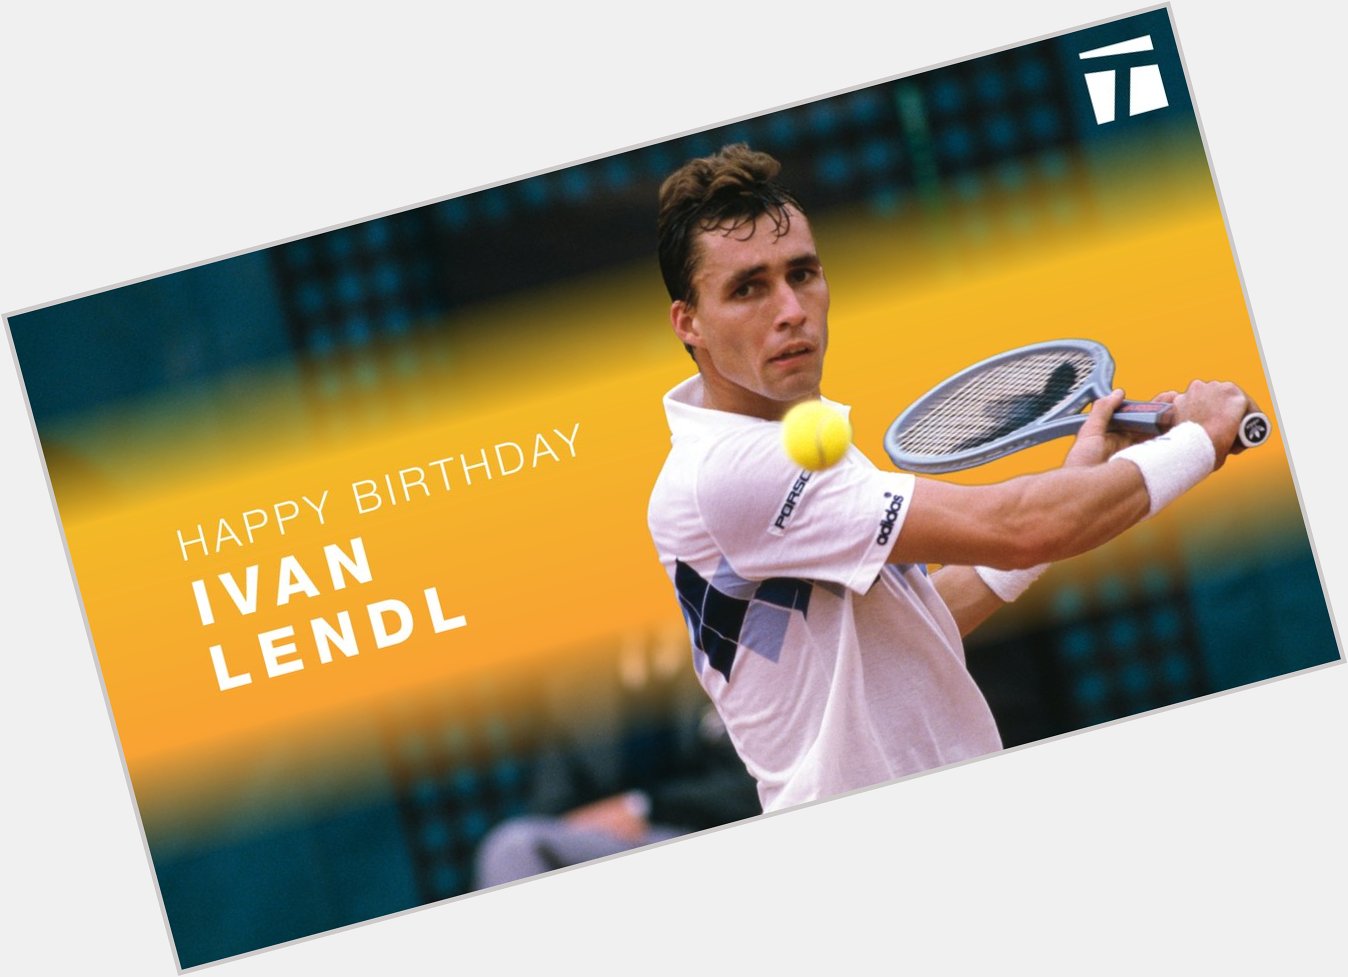 Happy birthday to former No. 1, 8-time major champion, and Hall of Famer Ivan Lendl. 